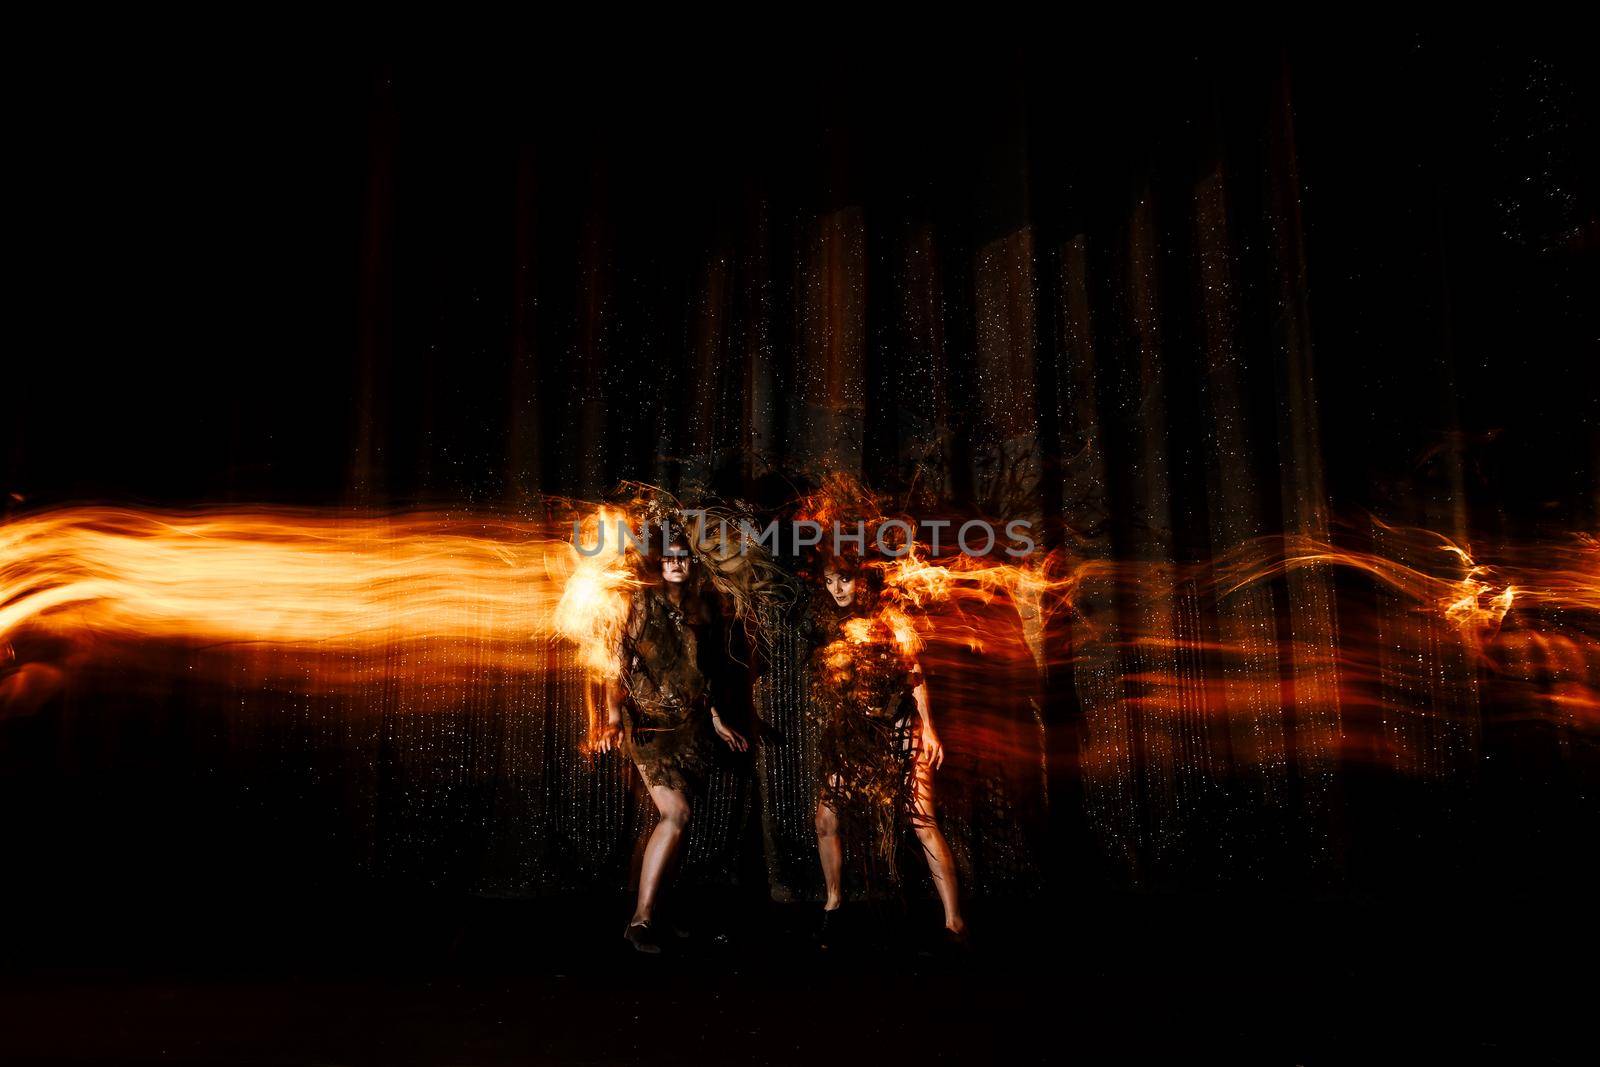 Ghost girls, spirits of the theater, accompanied by a trail of fire, on the stage of the theater. by deandy